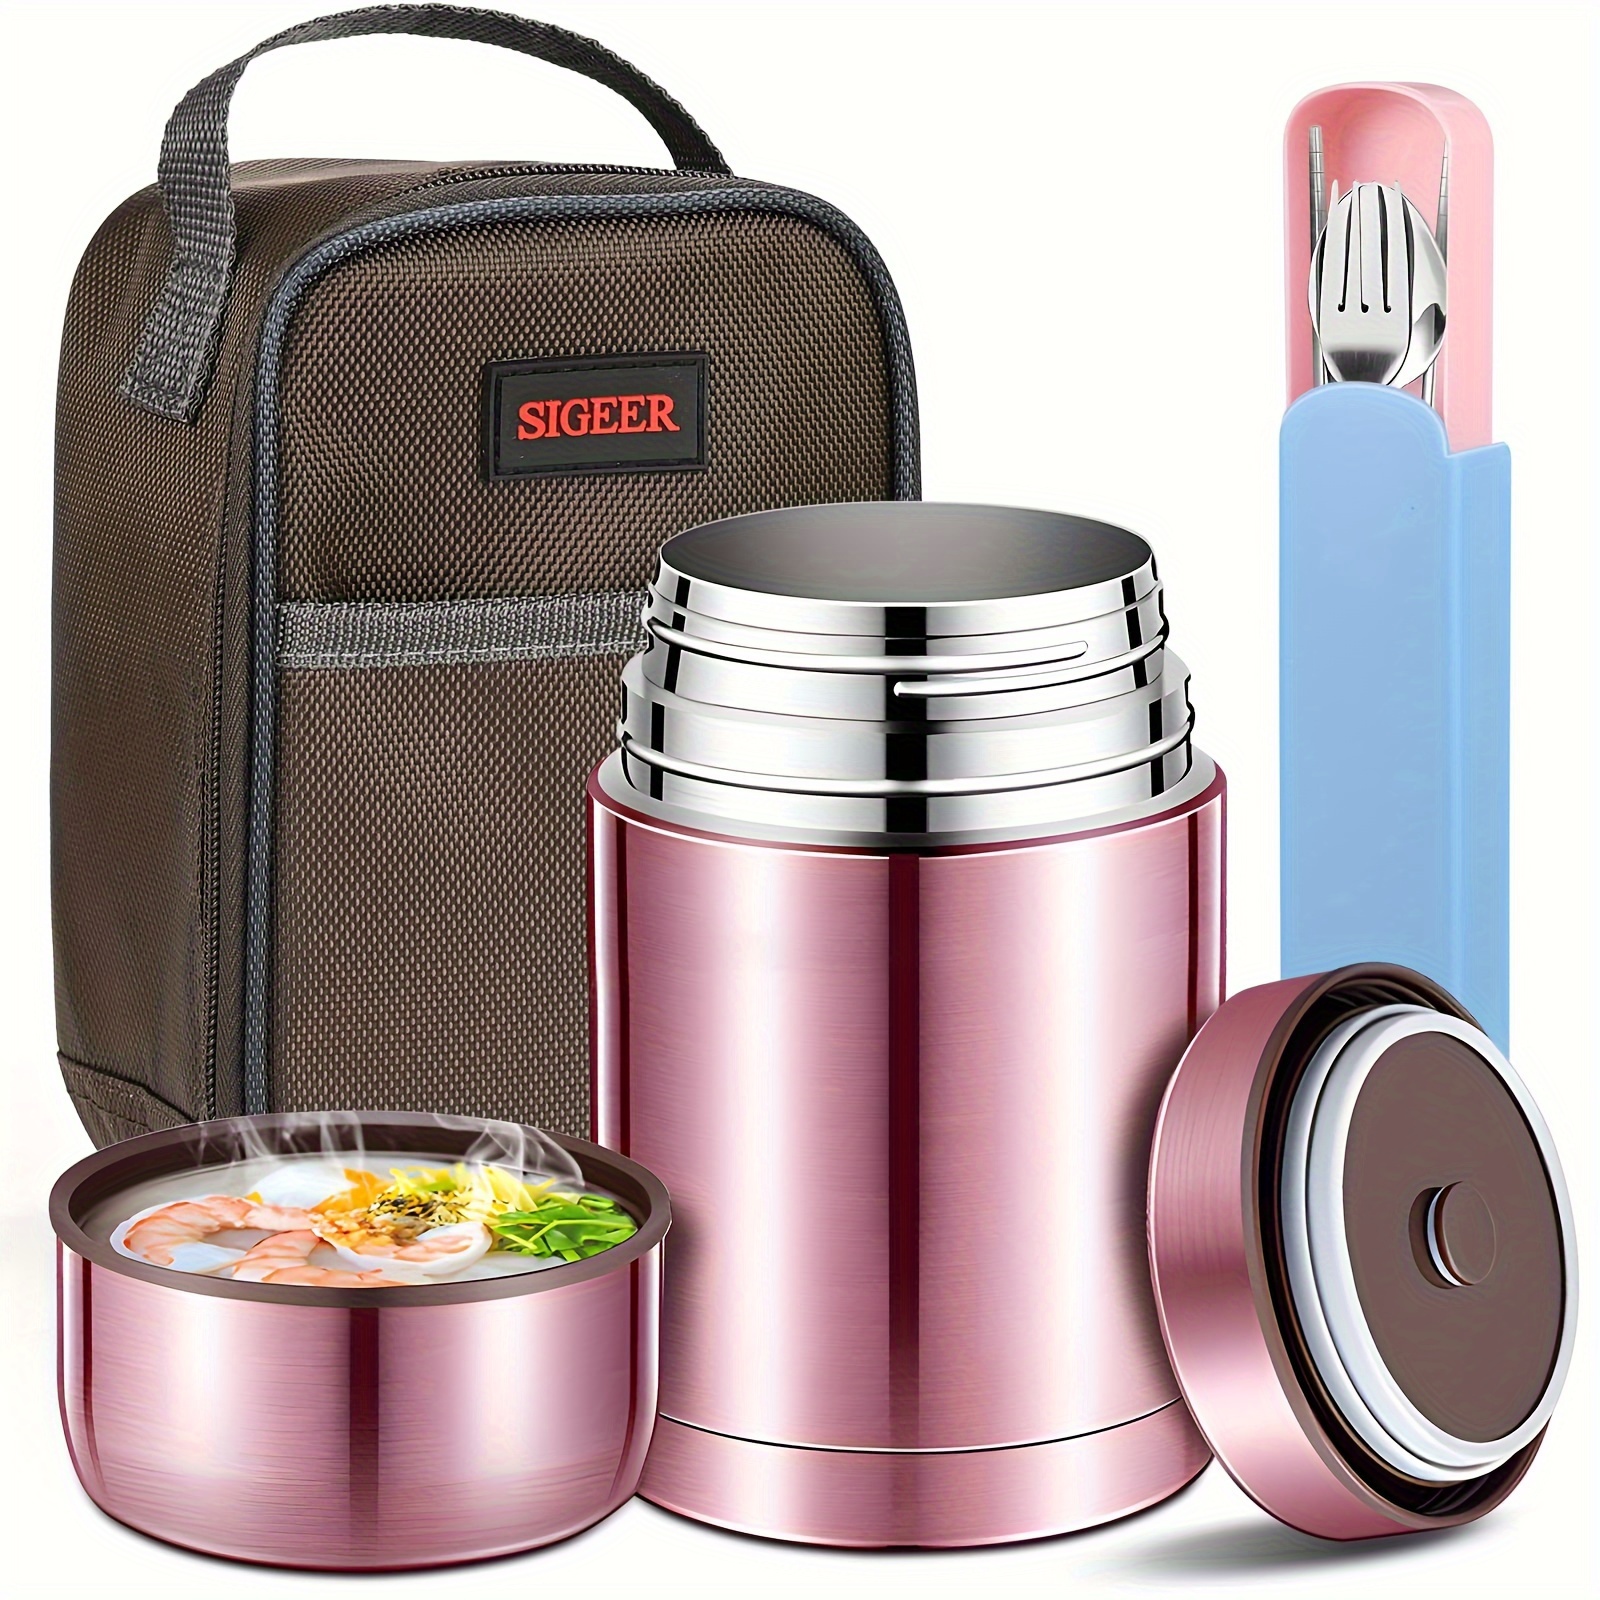 Thermal Lunch Box With Insulated Lunch Bag For Adults Kids Men Ladies  Girl,portable Leakproof Stainless Steel Metal Lunchbox Thermos Hot Food  Flask Wa